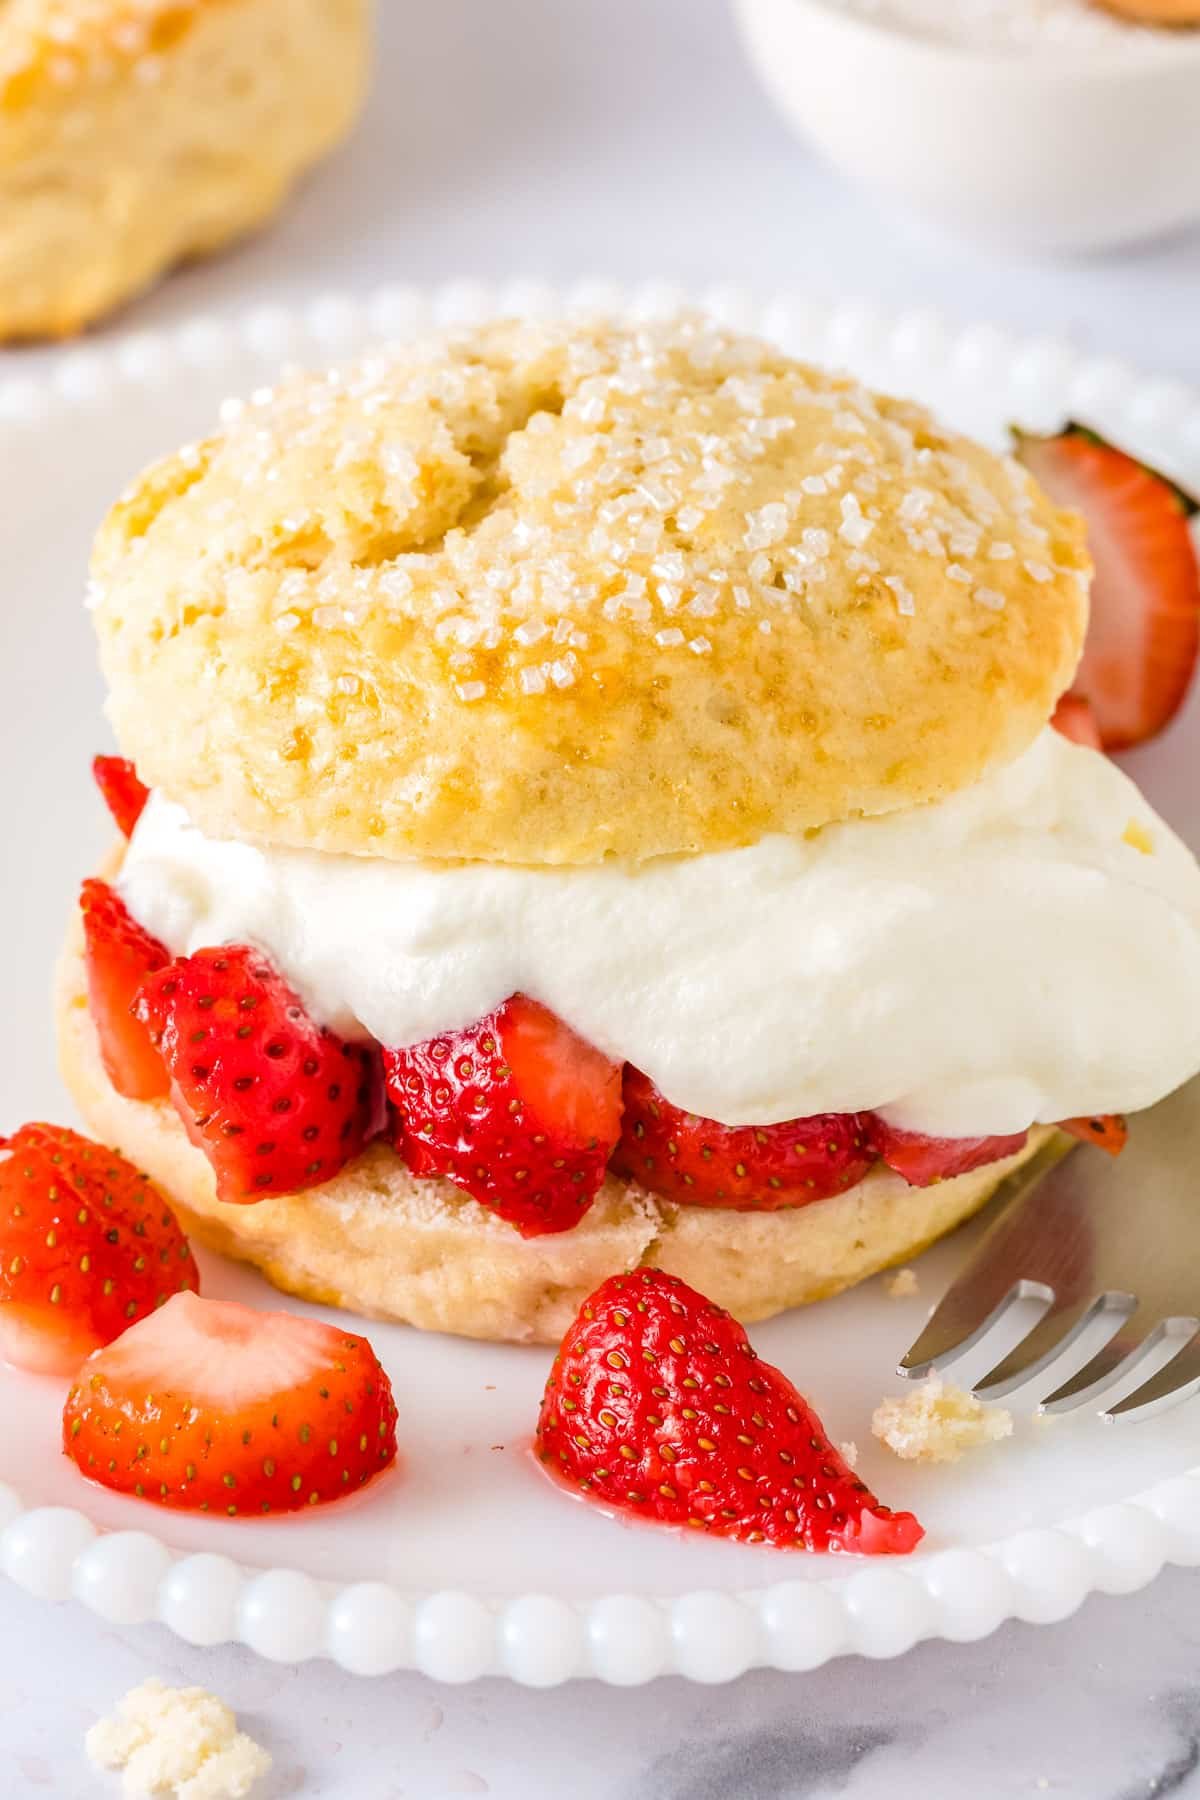 The finished Shortcake Biscuits cut in half and filled with strawberries and cream.